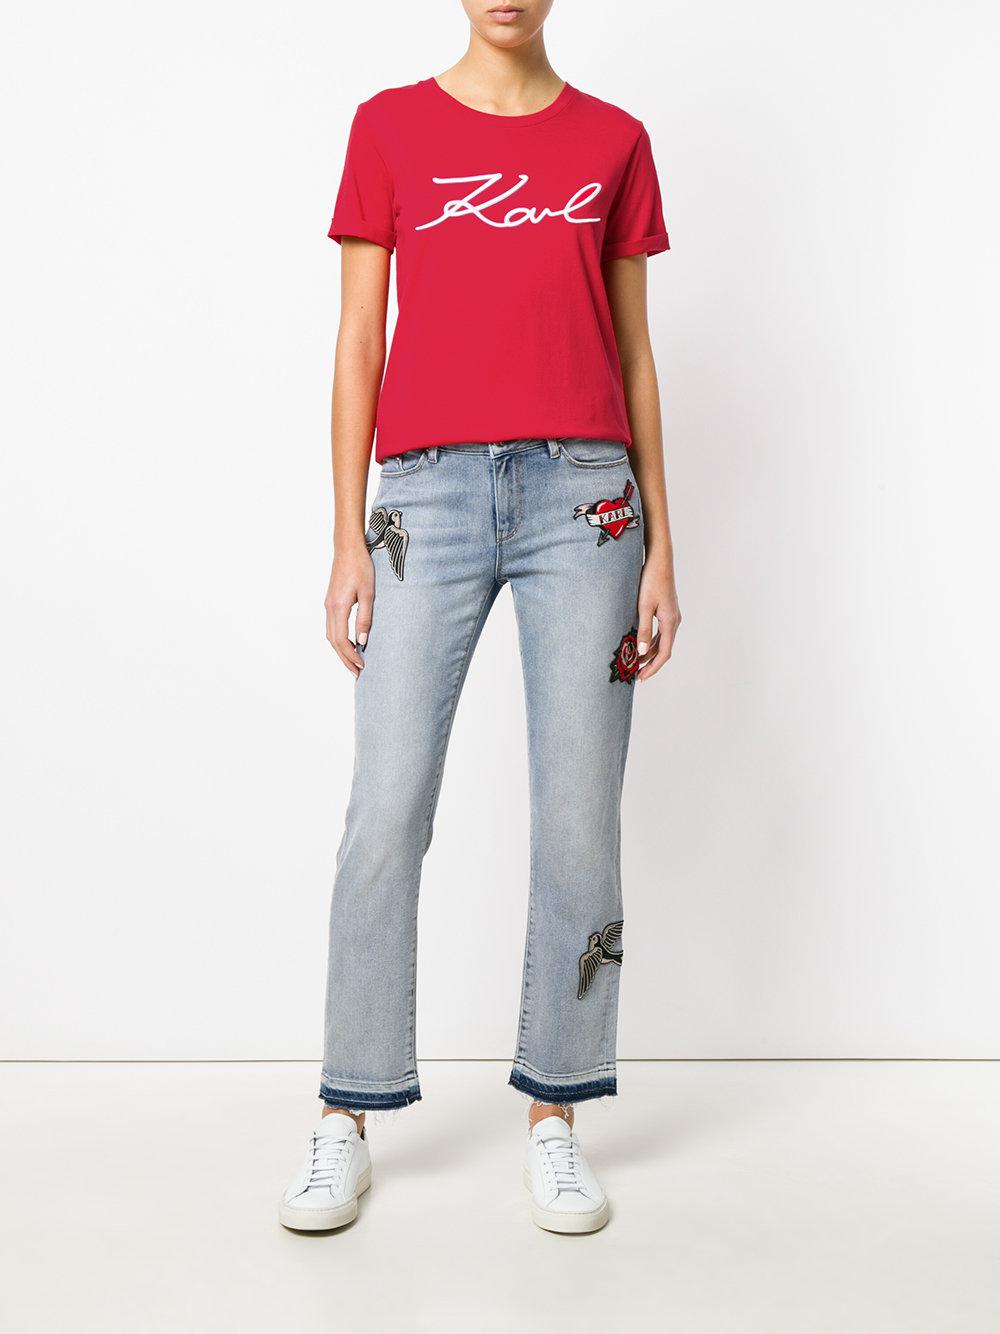 Lyst - Karl Lagerfeld Karl Signature T-shirt in Red